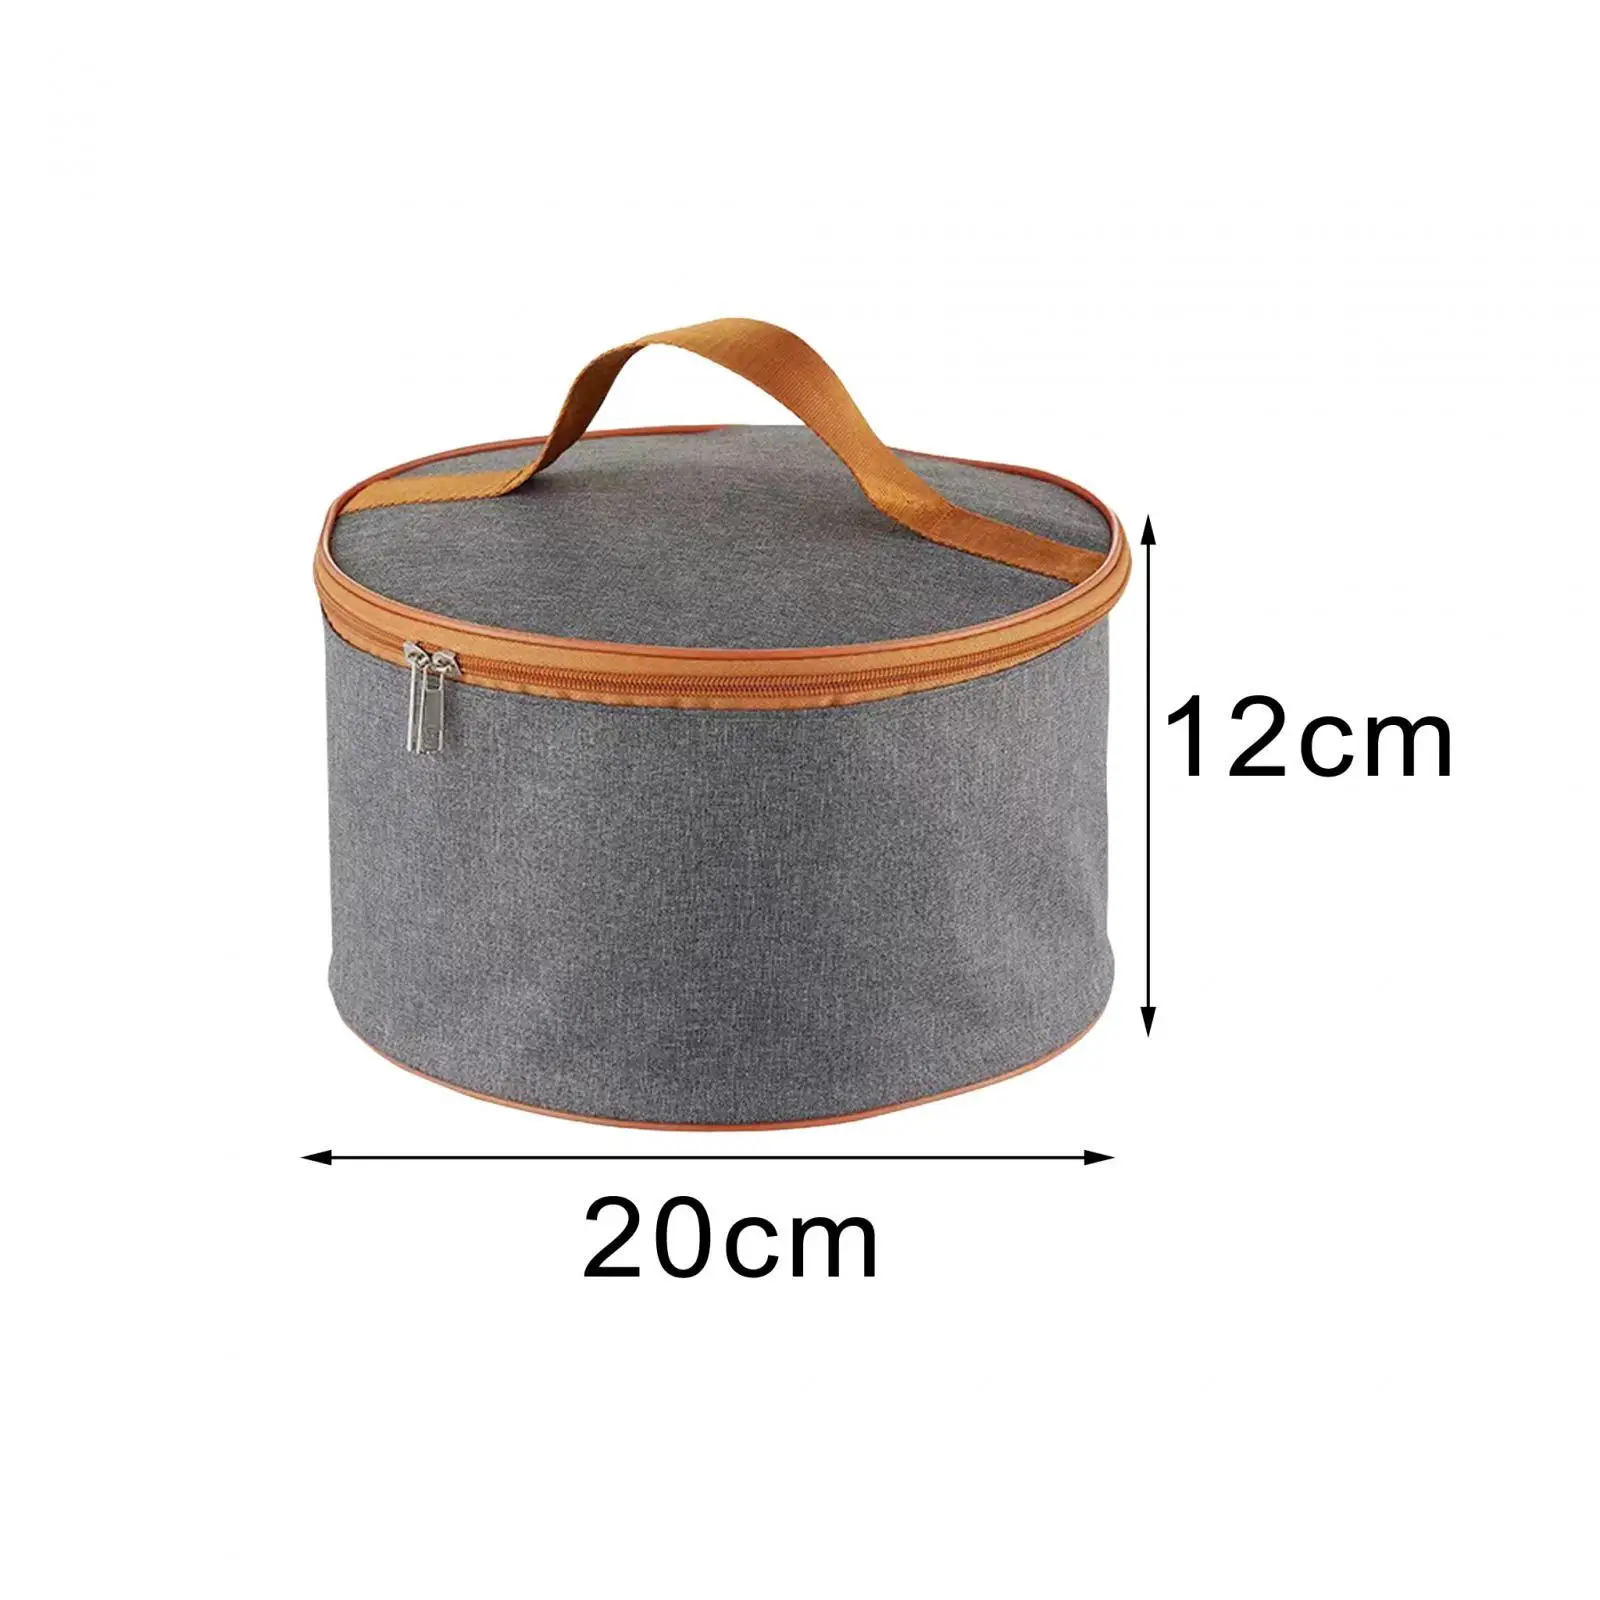 Camping Cookware Carry Bag Portable Utility Tote Bag Camping Pot Storage Bag for Hiking Outdoor Sports Backpacking Picnic Beach